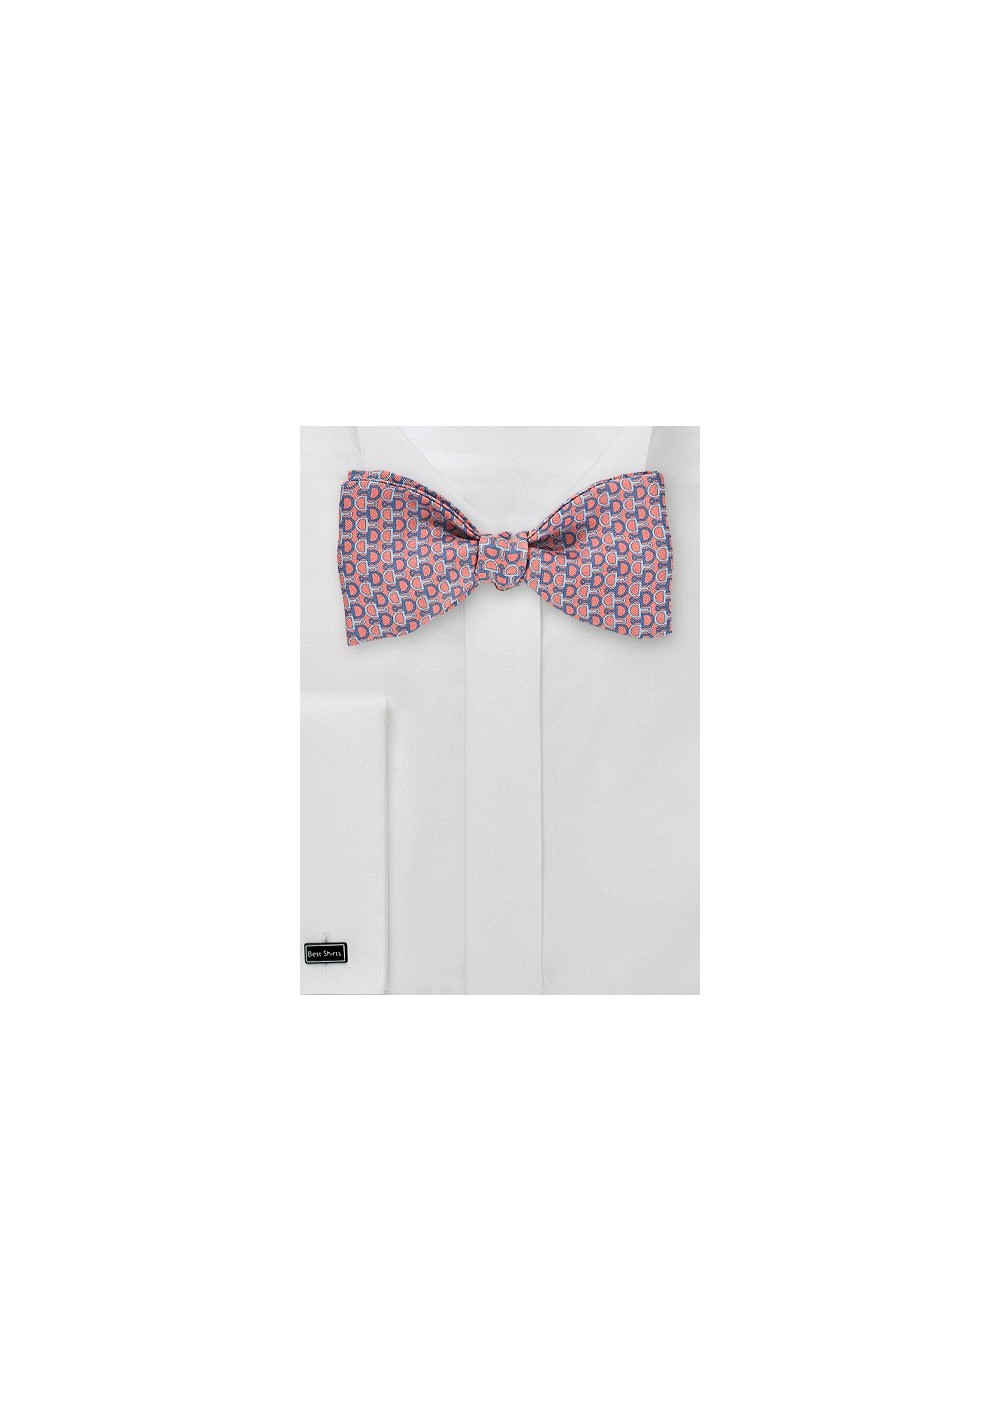 Graphic Bow Tie in Corals and Blues